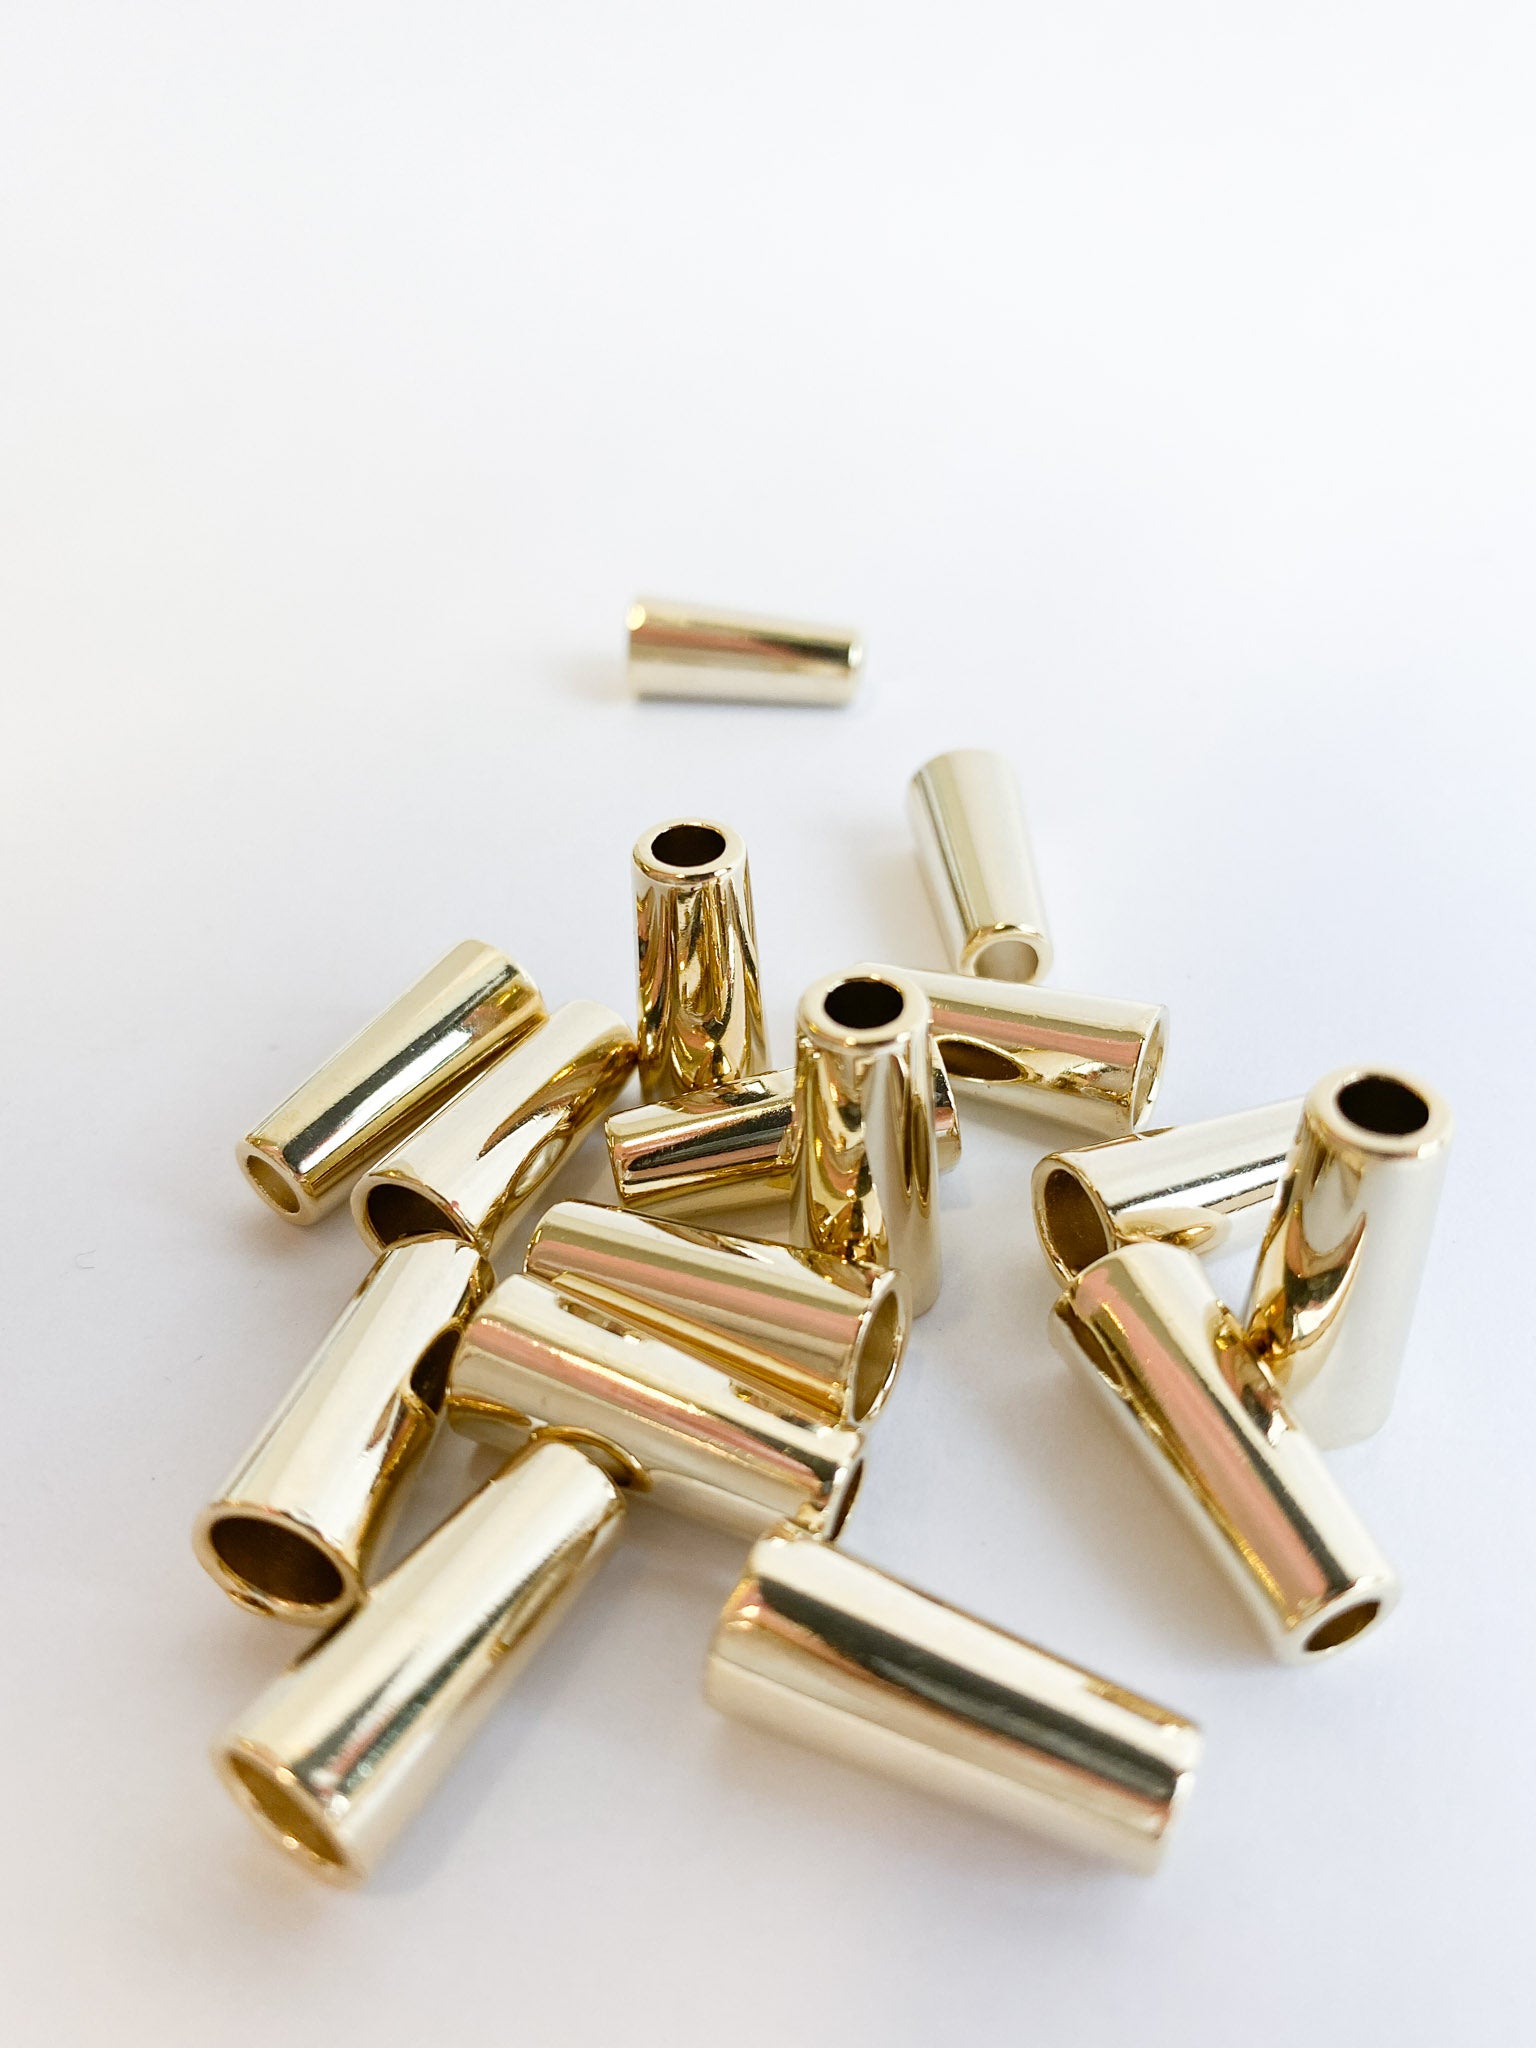 Cord end 3 mm gold